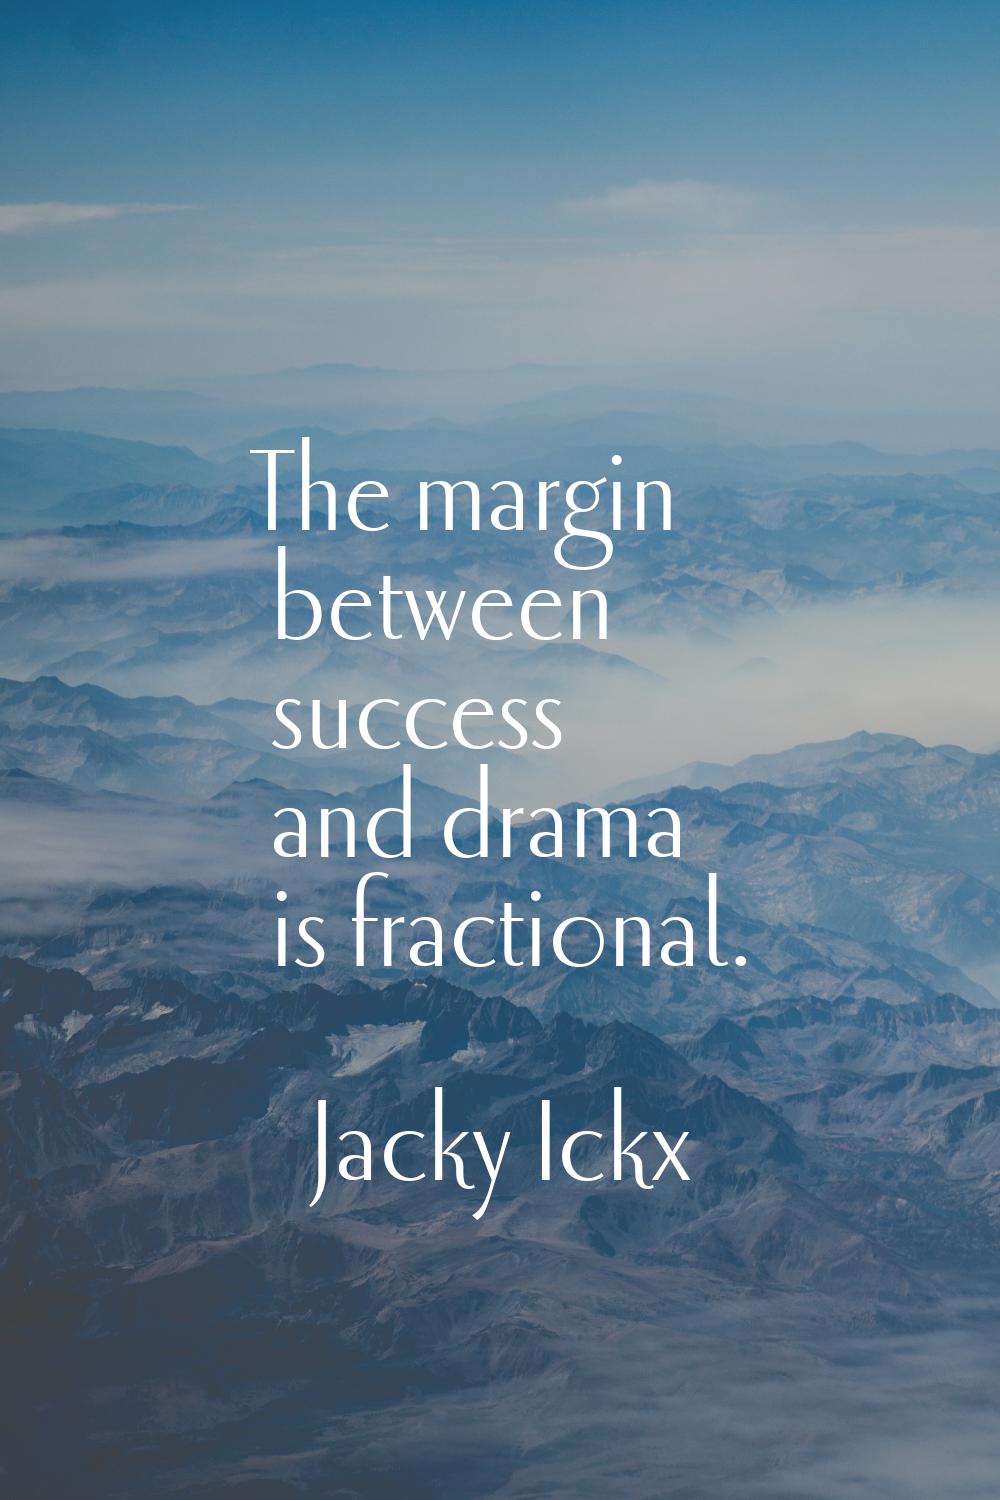 The margin between success and drama is fractional.